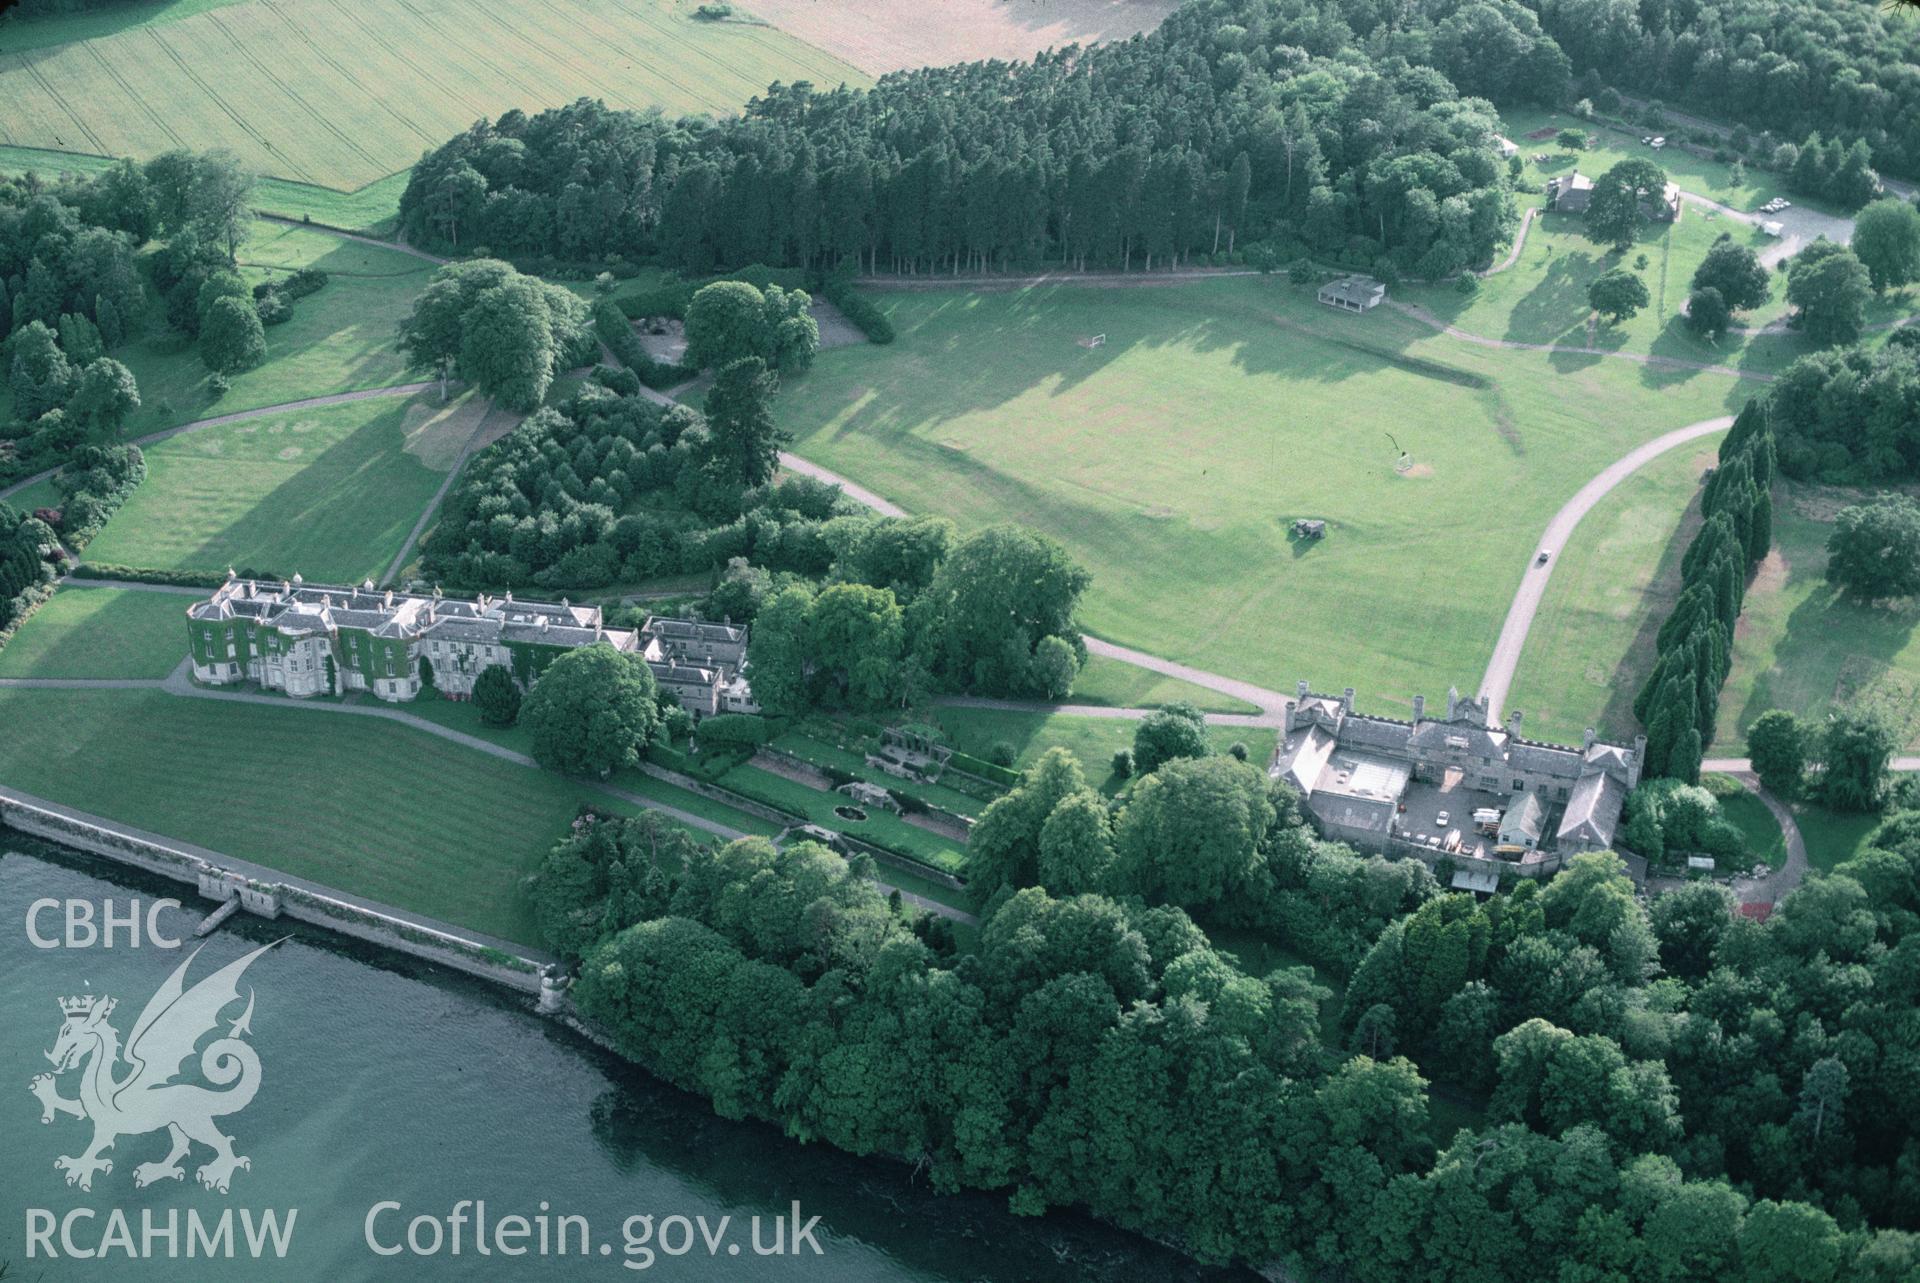 Slide of RCAHMW colour oblique aerial photograph of Plas Newydd, taken by C.R. Musson, 27/7/1996.